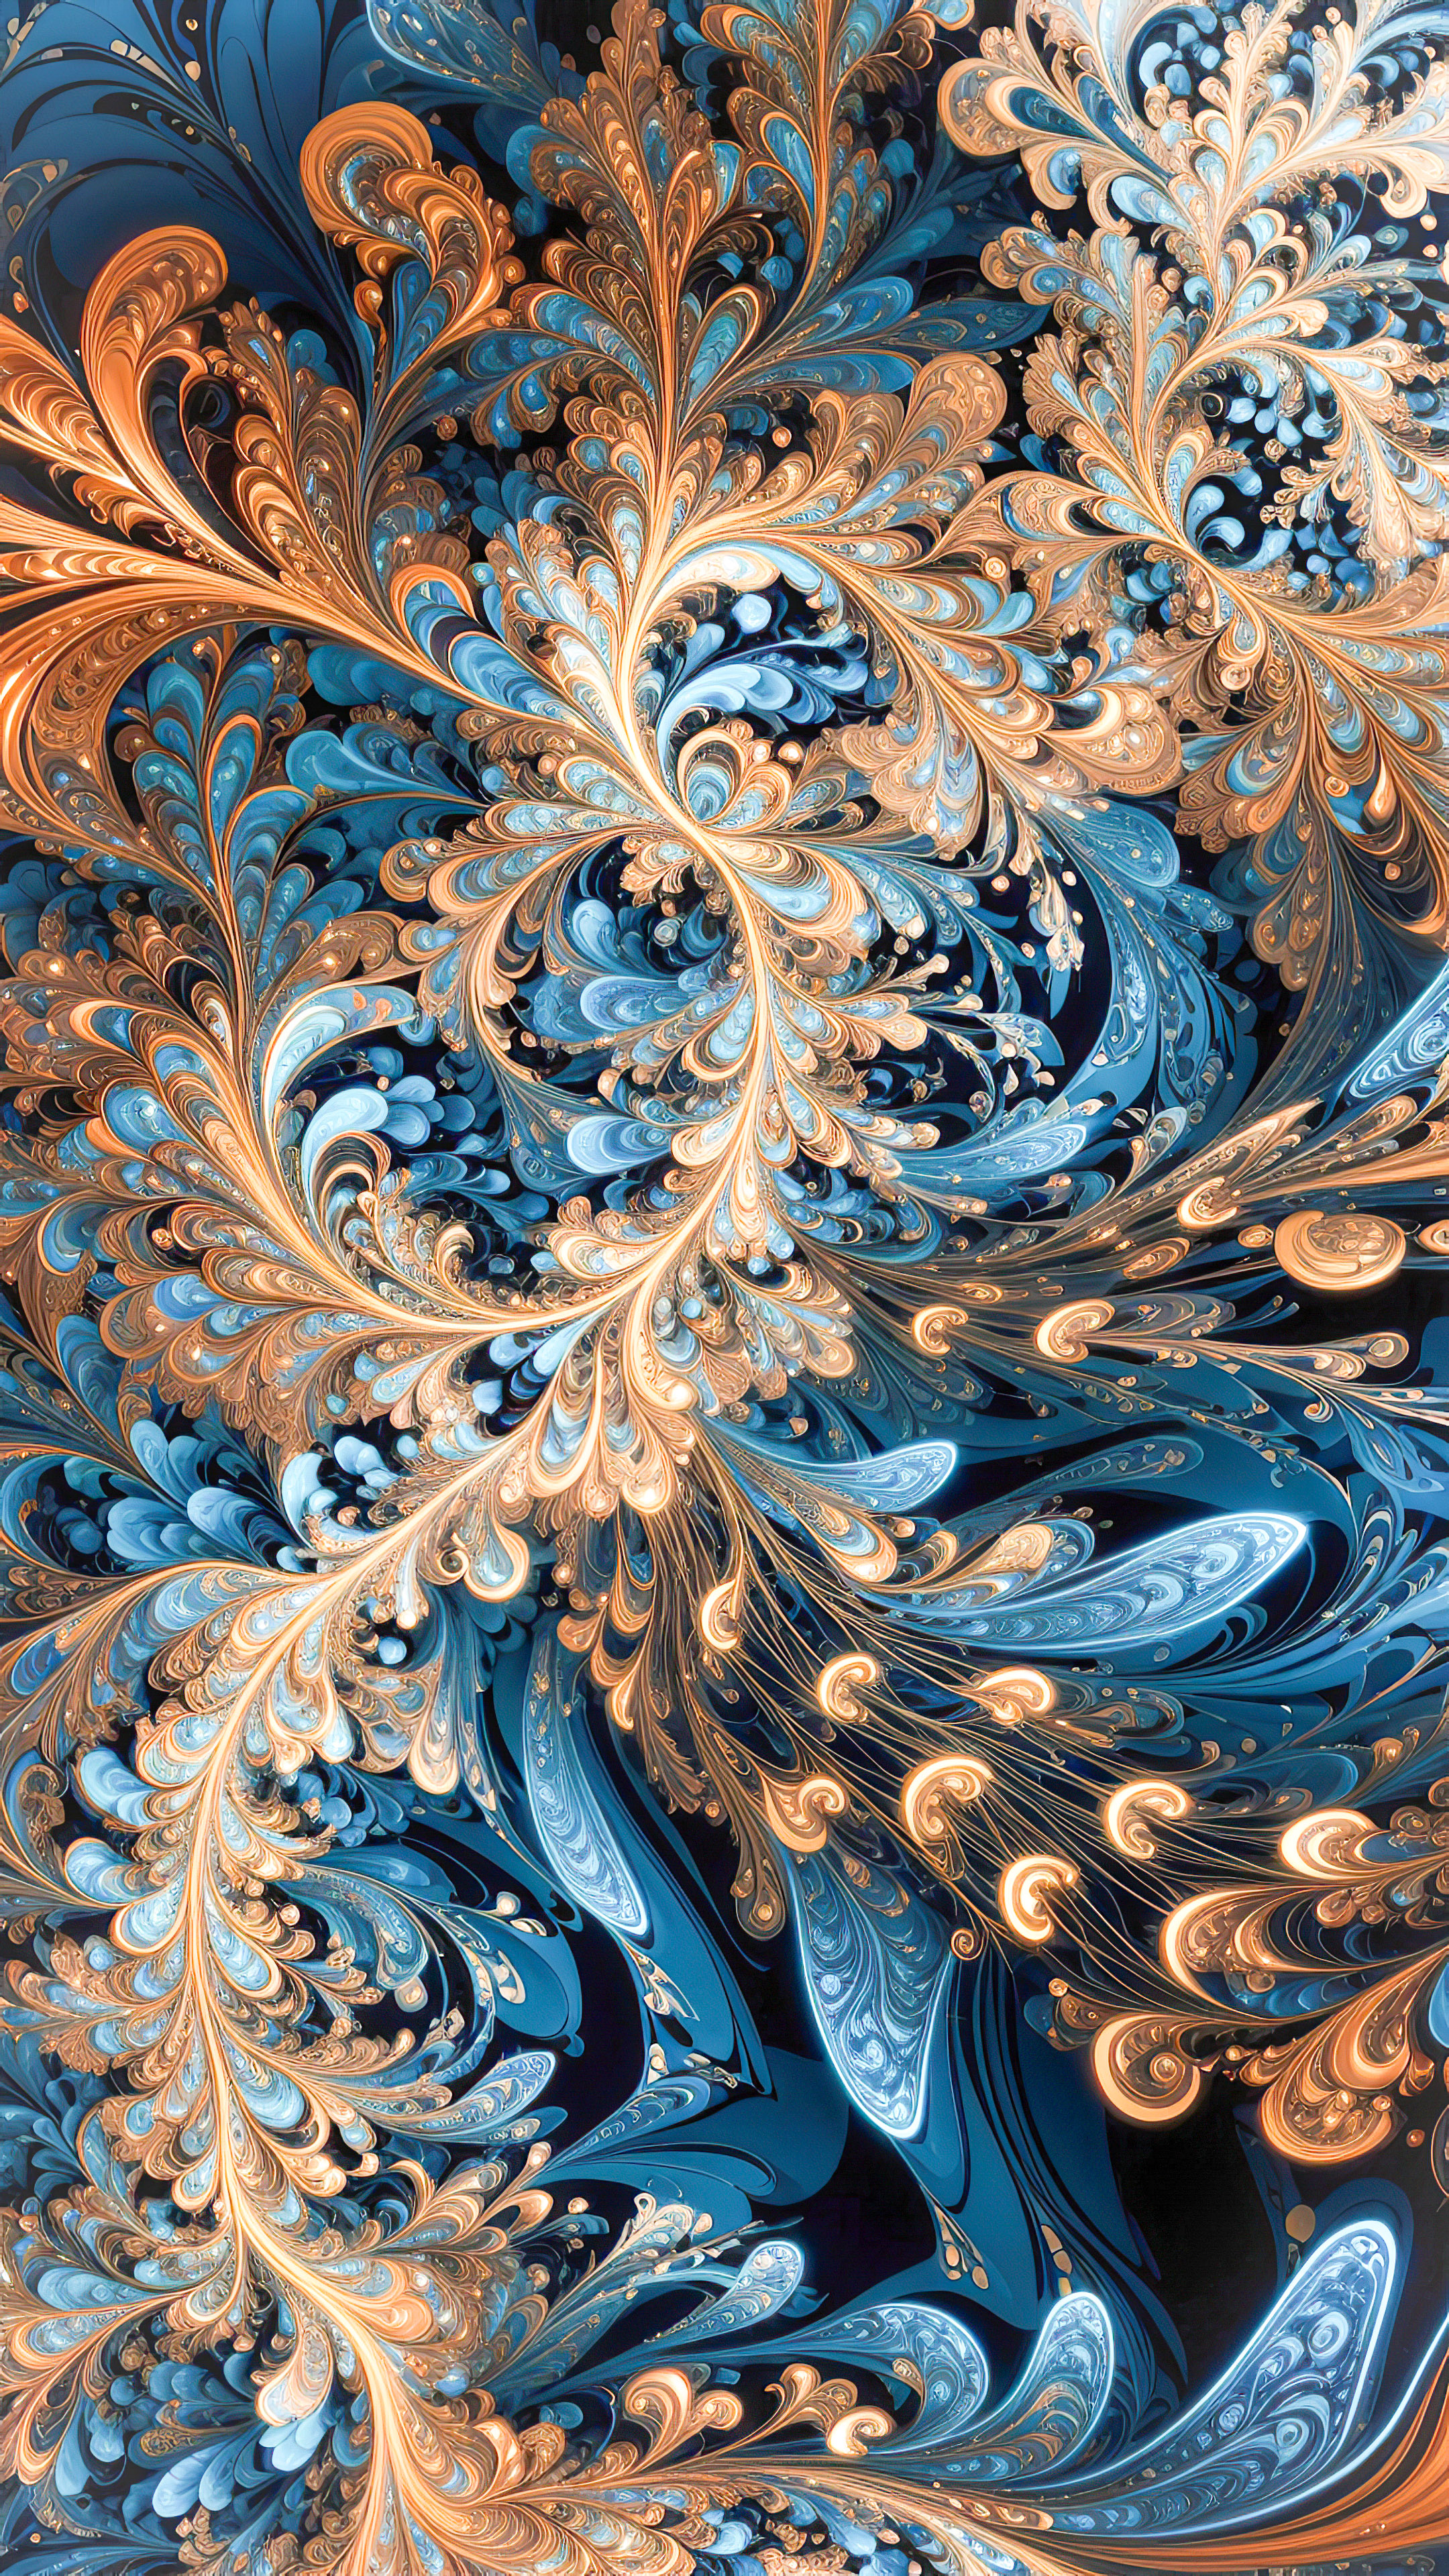 Explore intricate fractal patterns in high definition with our abstract art iPhone wallpaper.